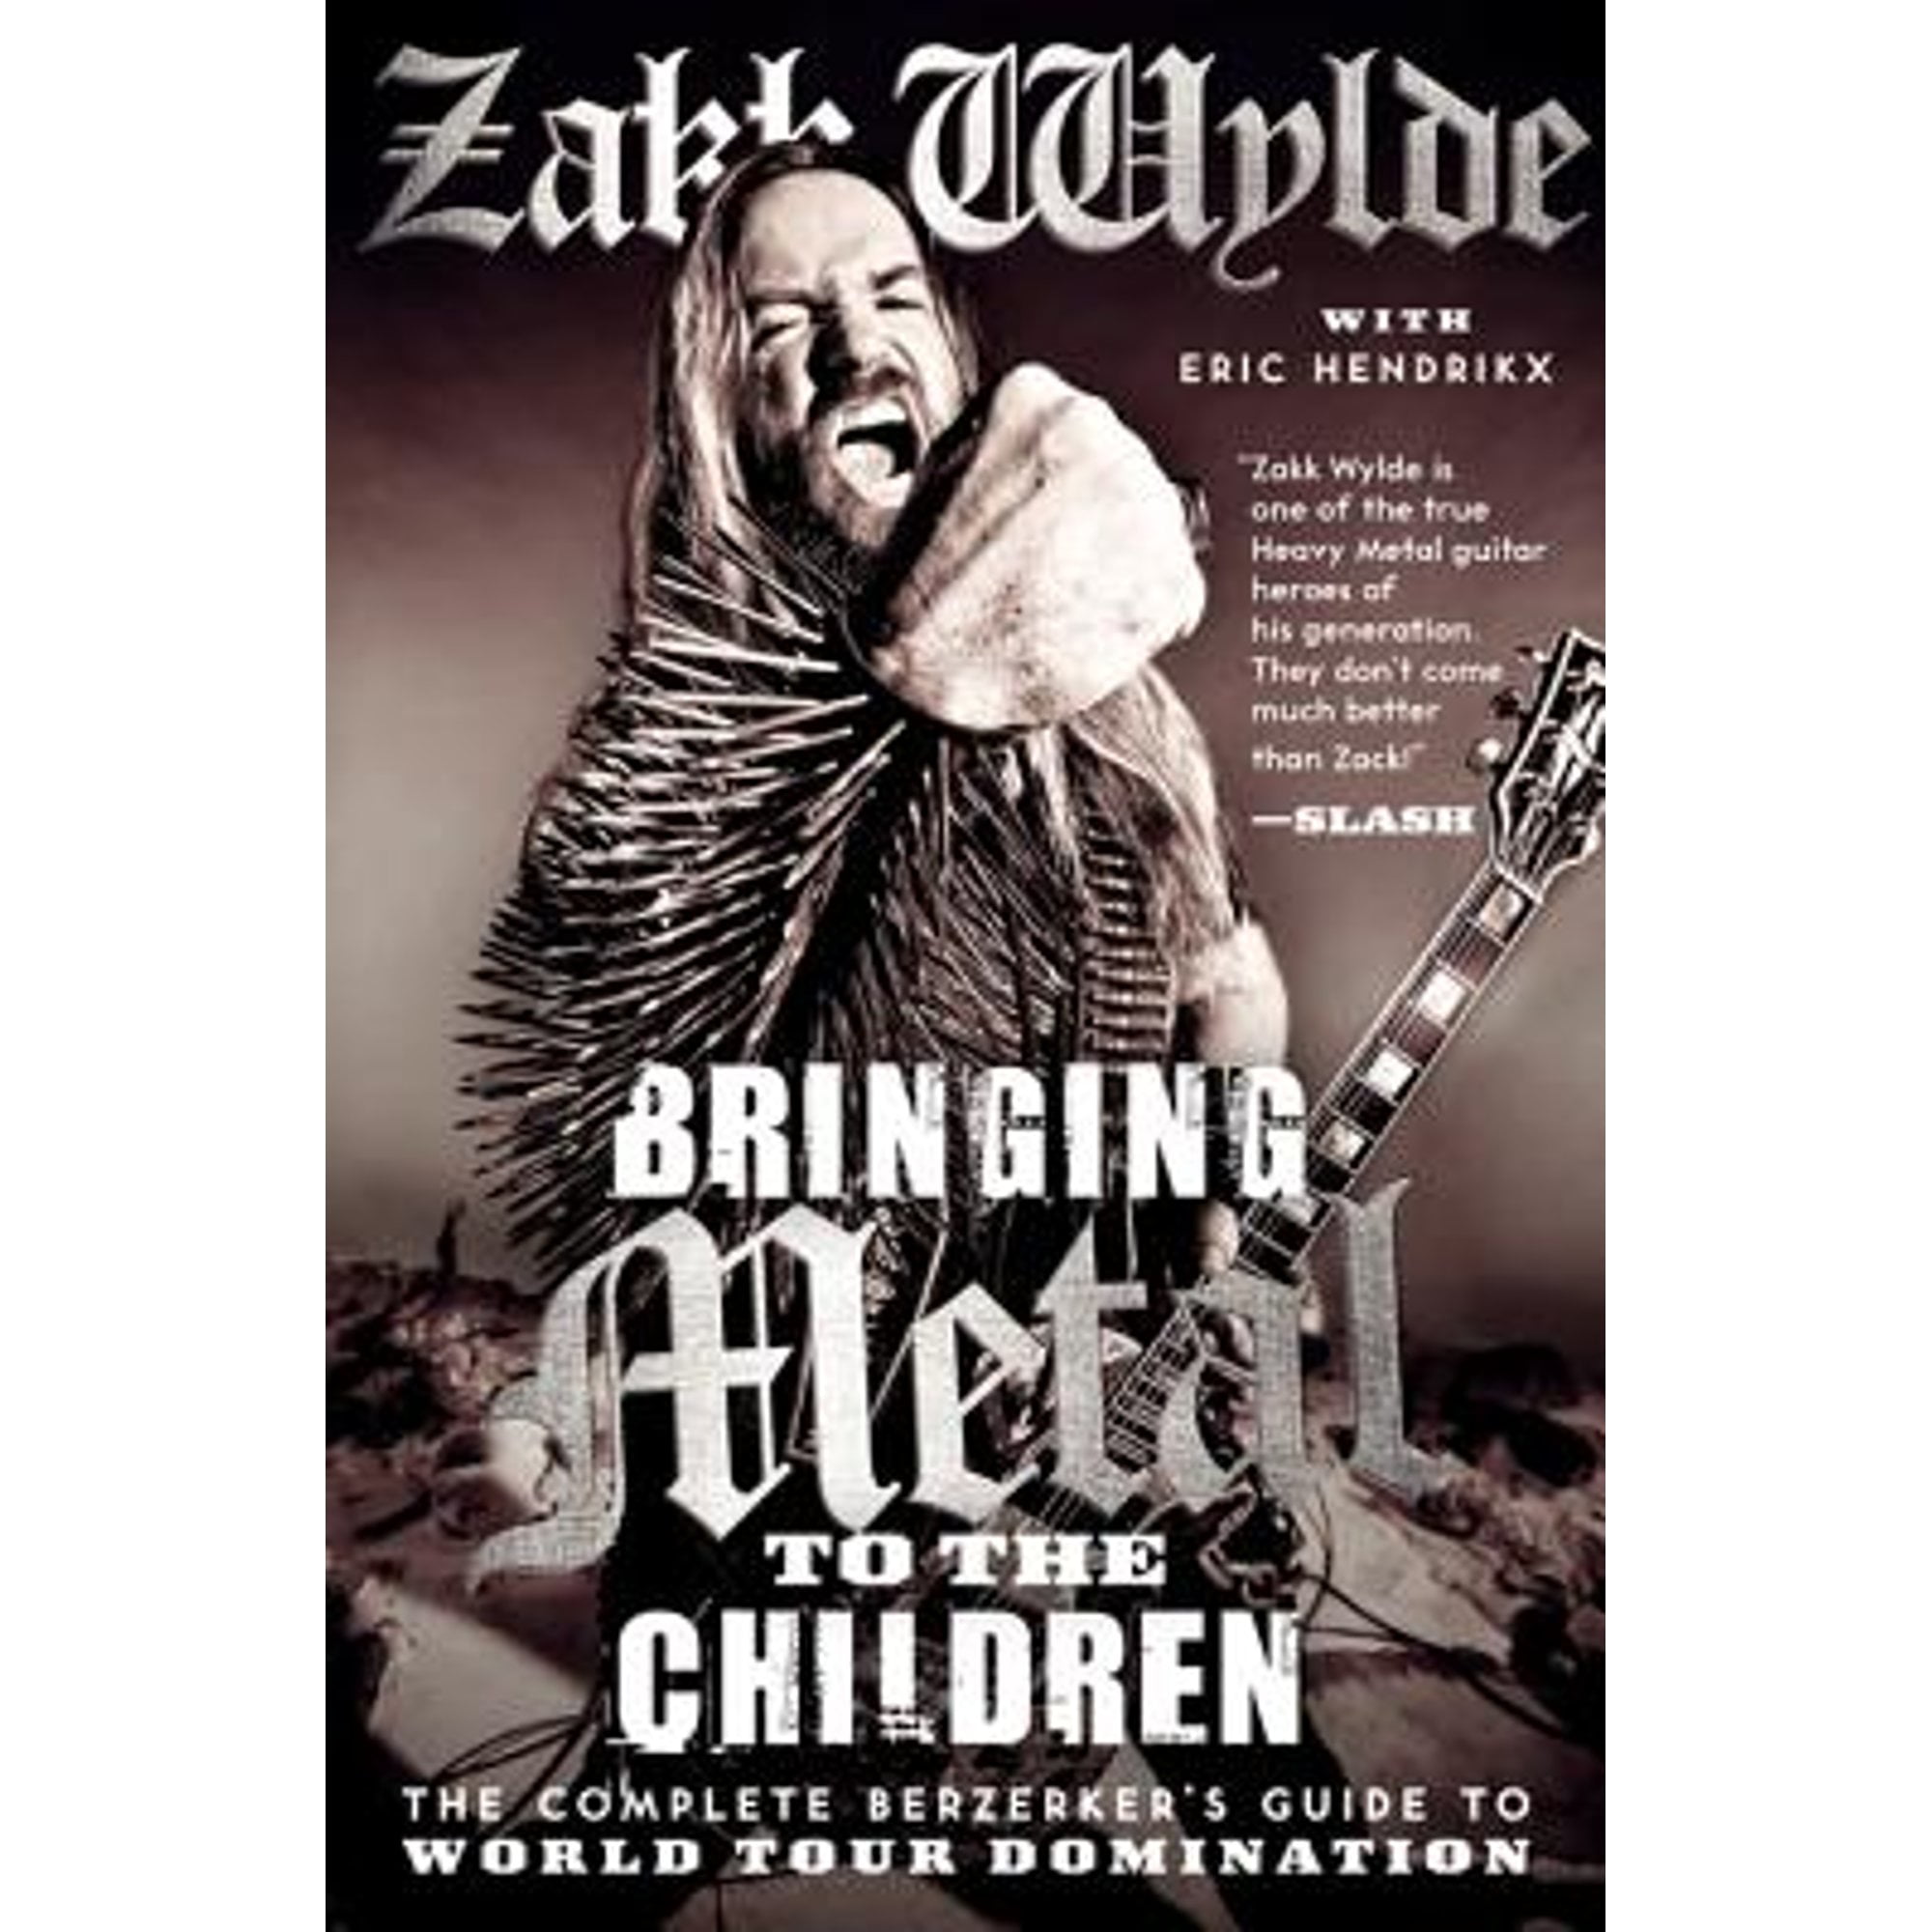 Pre-Owned Bringing Metal to the Children: The Complete Berzerker's Guide to World Tour Domination (Hardcover 9780062002747) by Zakk Wylde, Eric Hendrikx